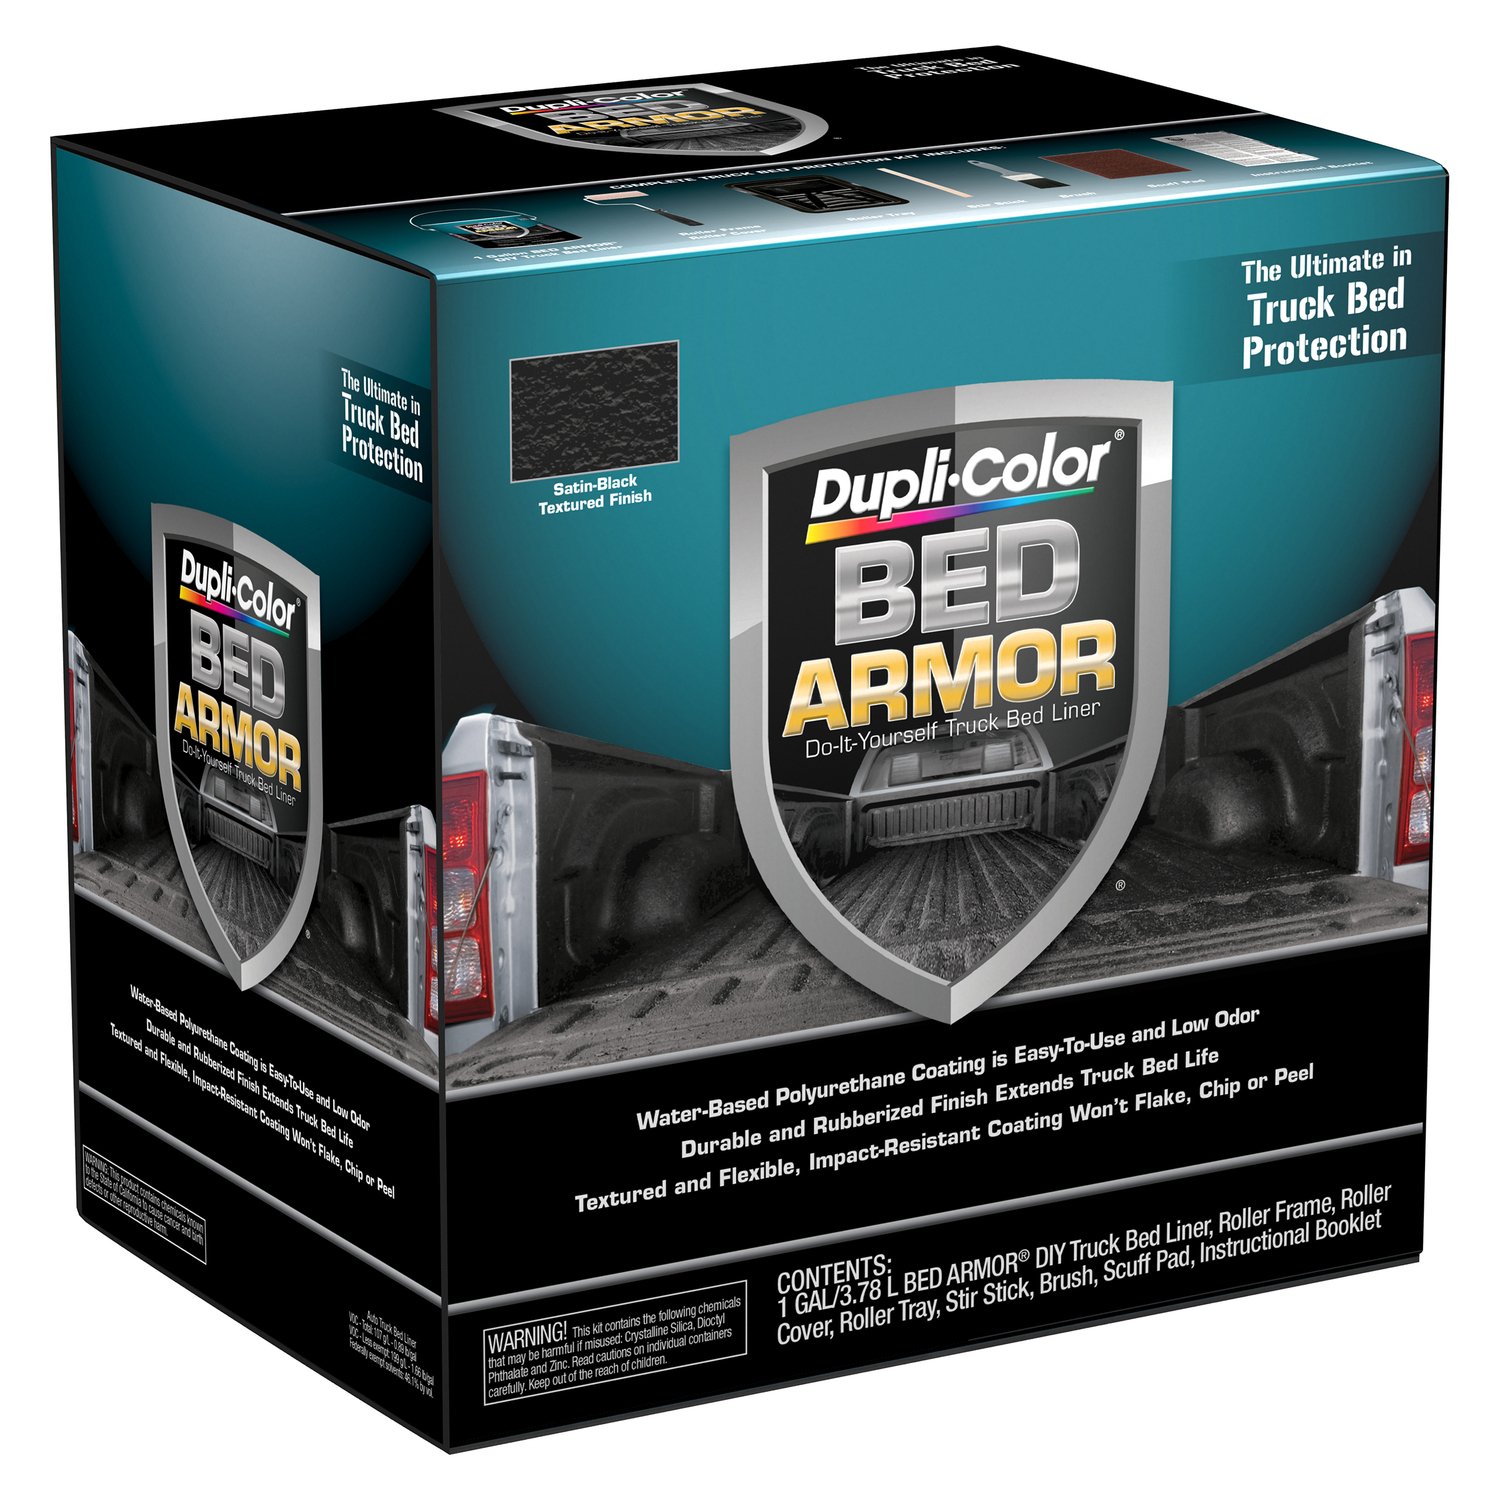 Bed Armor Kit Includes: Satin Black Bed Armor (1 gallon)